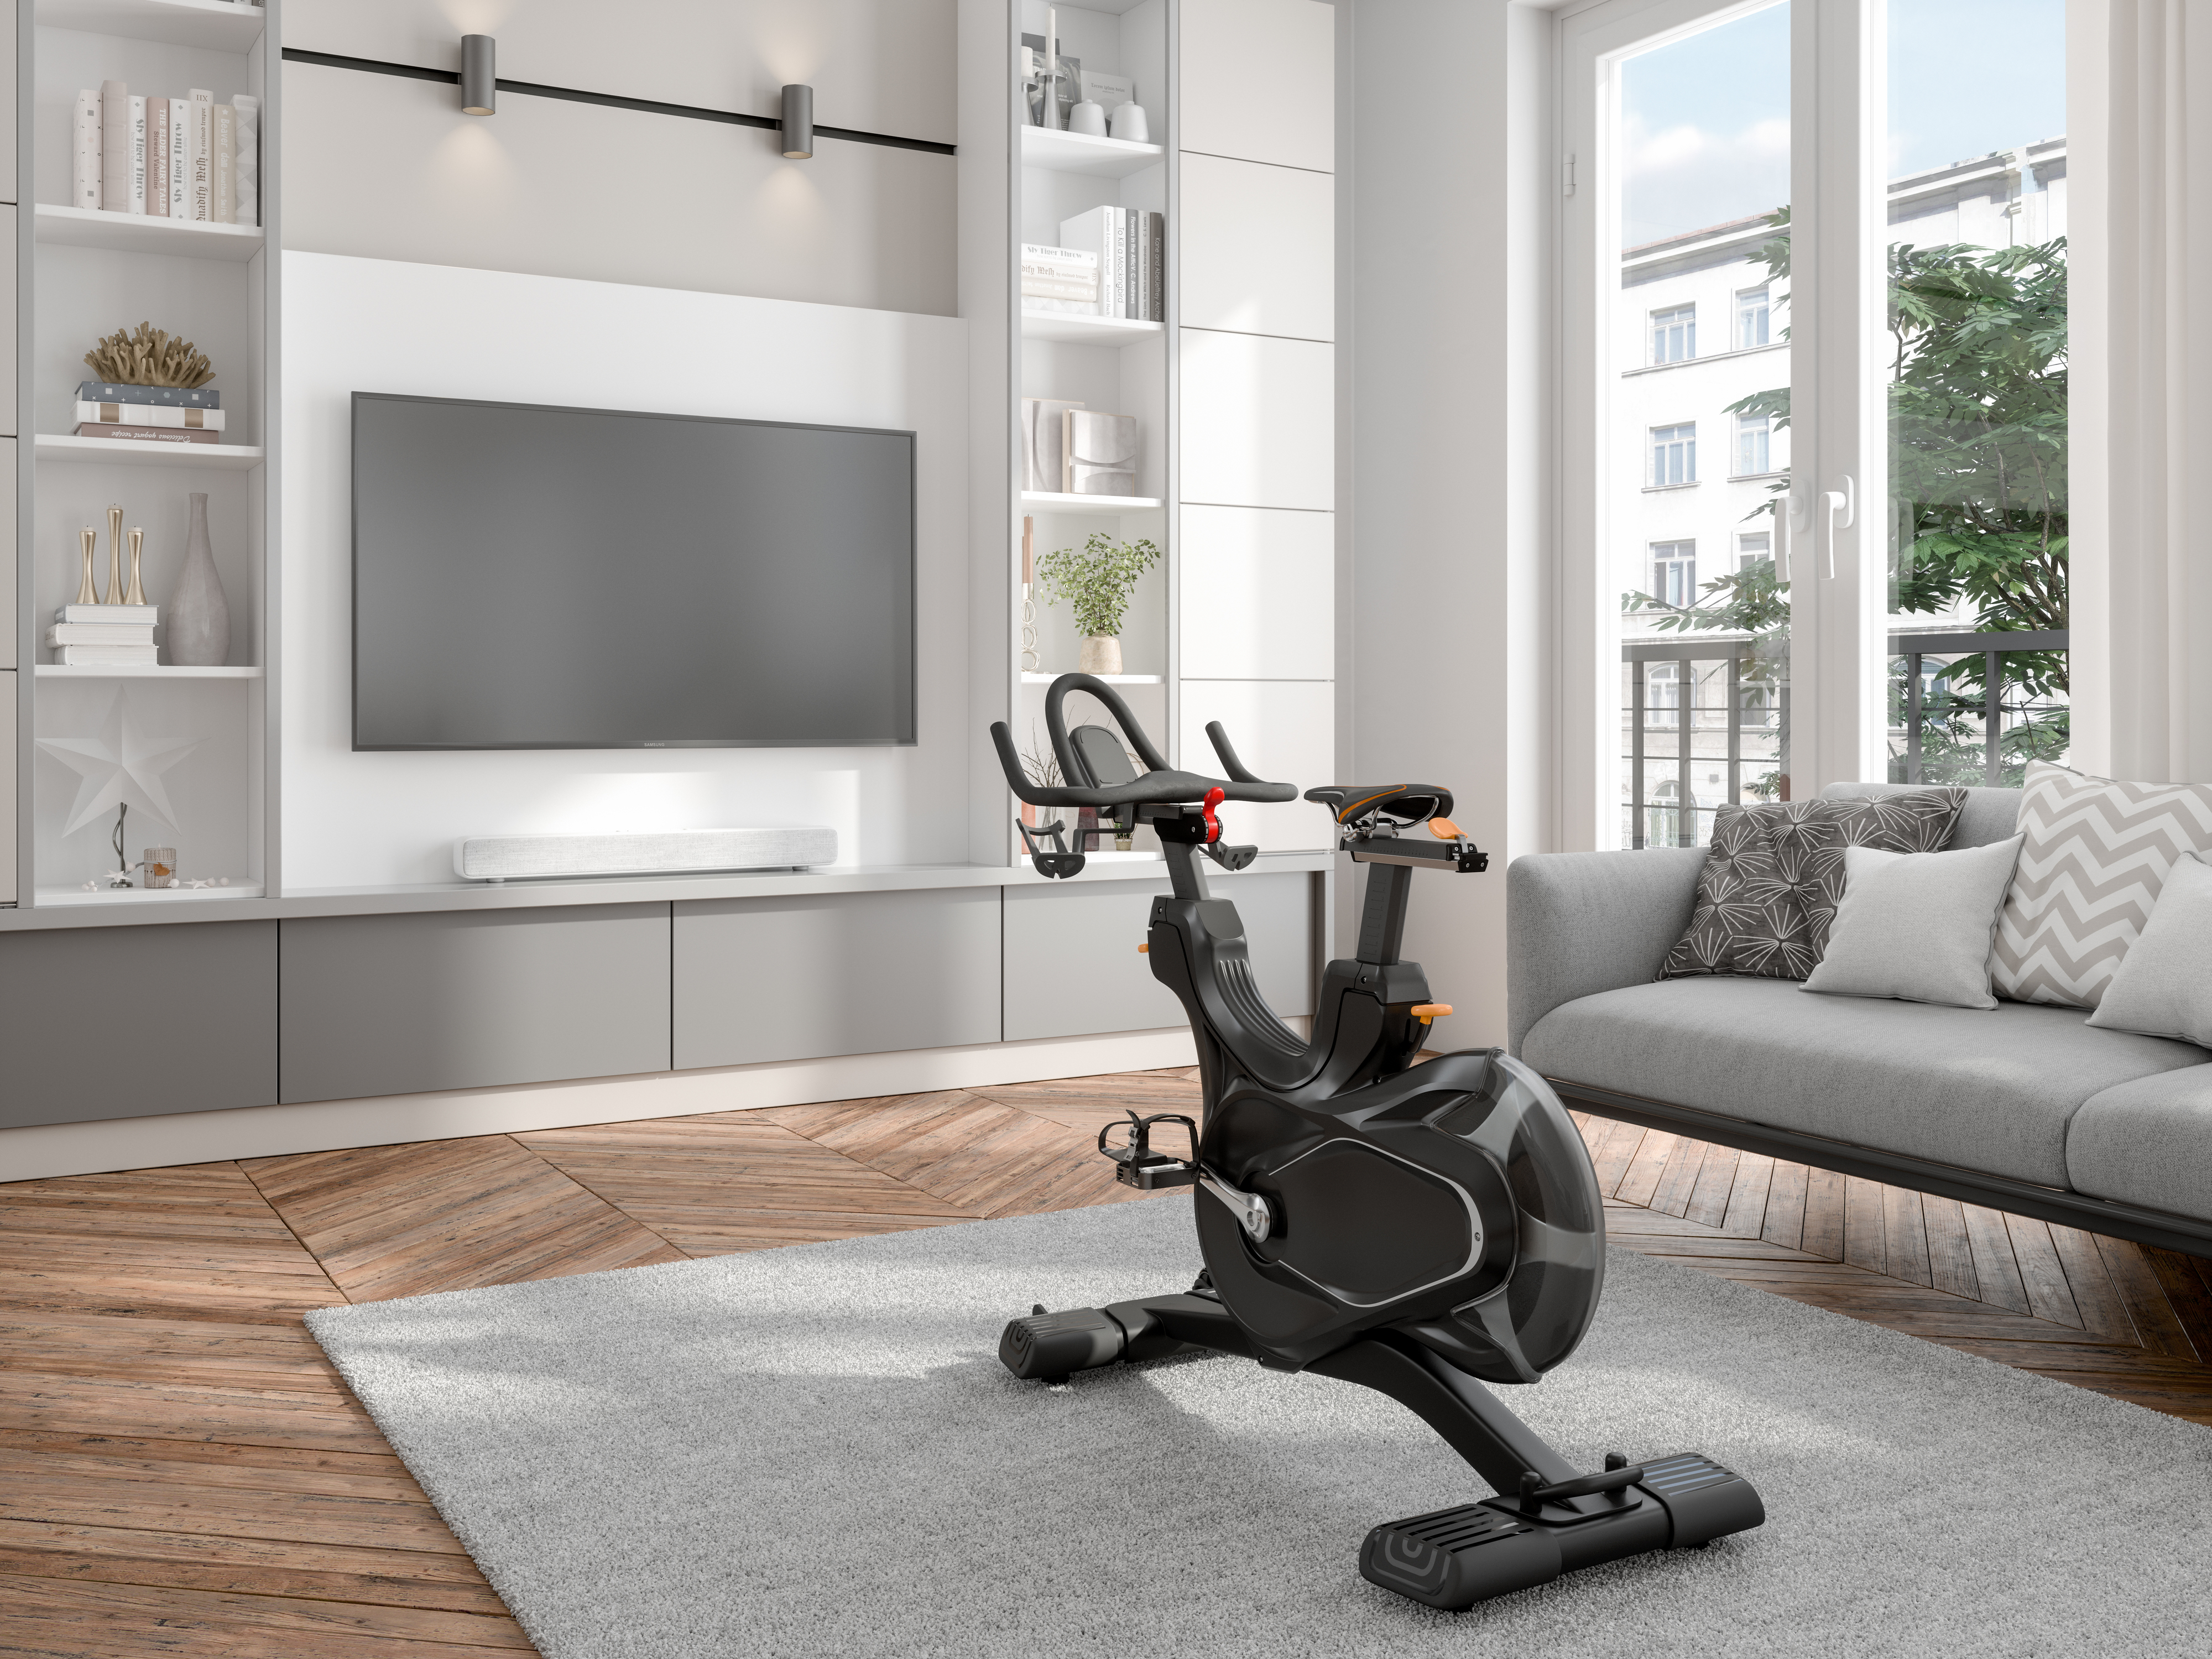 Exercise bike in a living room with a TV and bookshelves